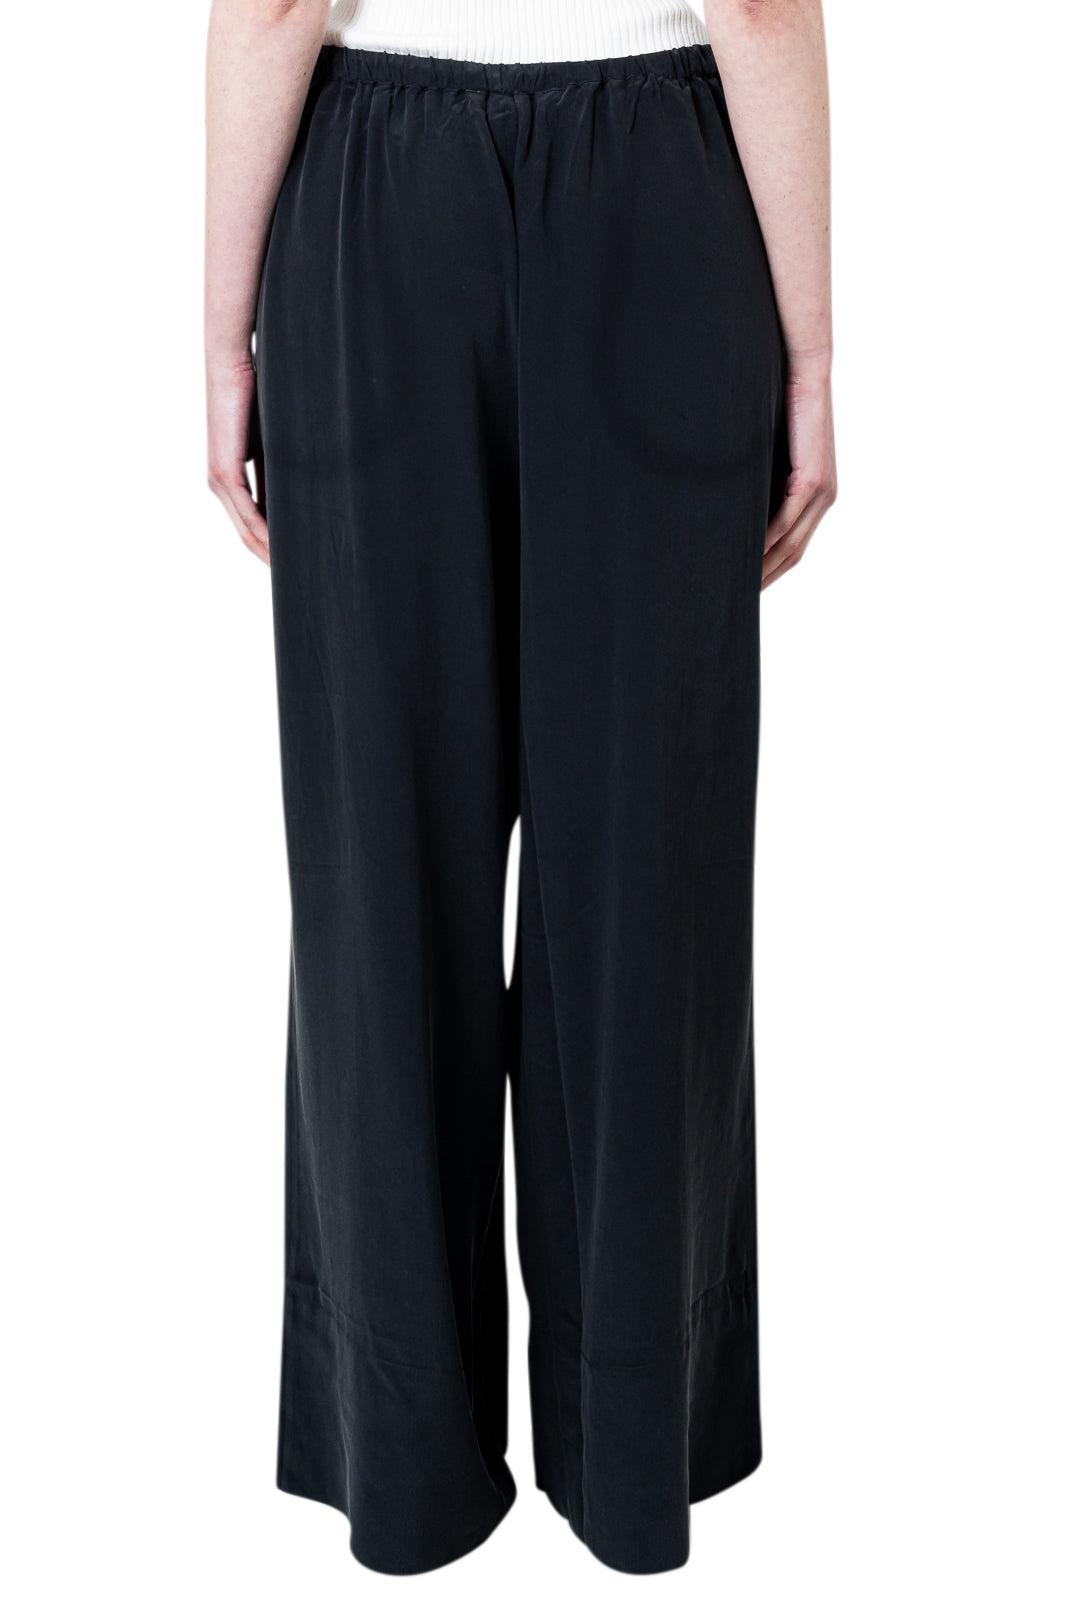 St. Agni-Relaxed Silk Pants-R24-511WBK-dgallerystore